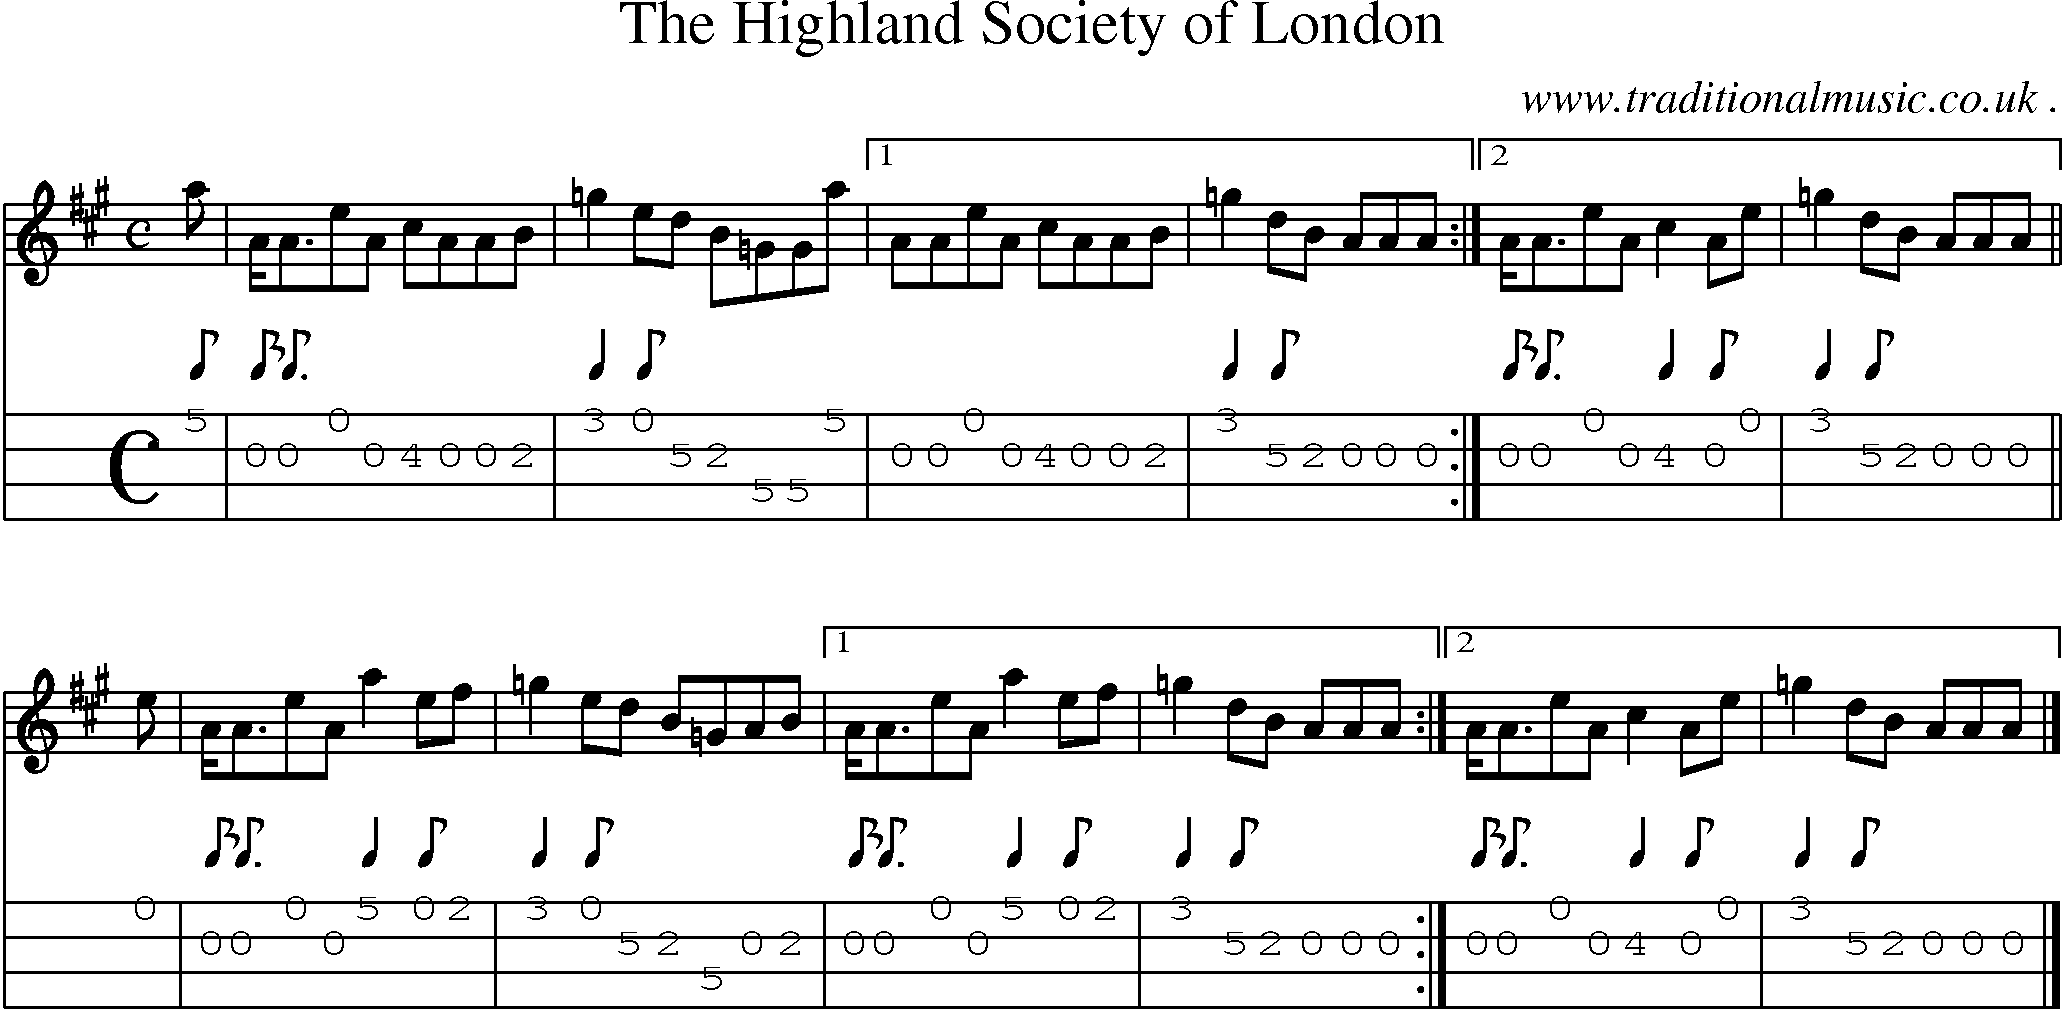 Sheet-music  score, Chords and Mandolin Tabs for The Highland Society Of London